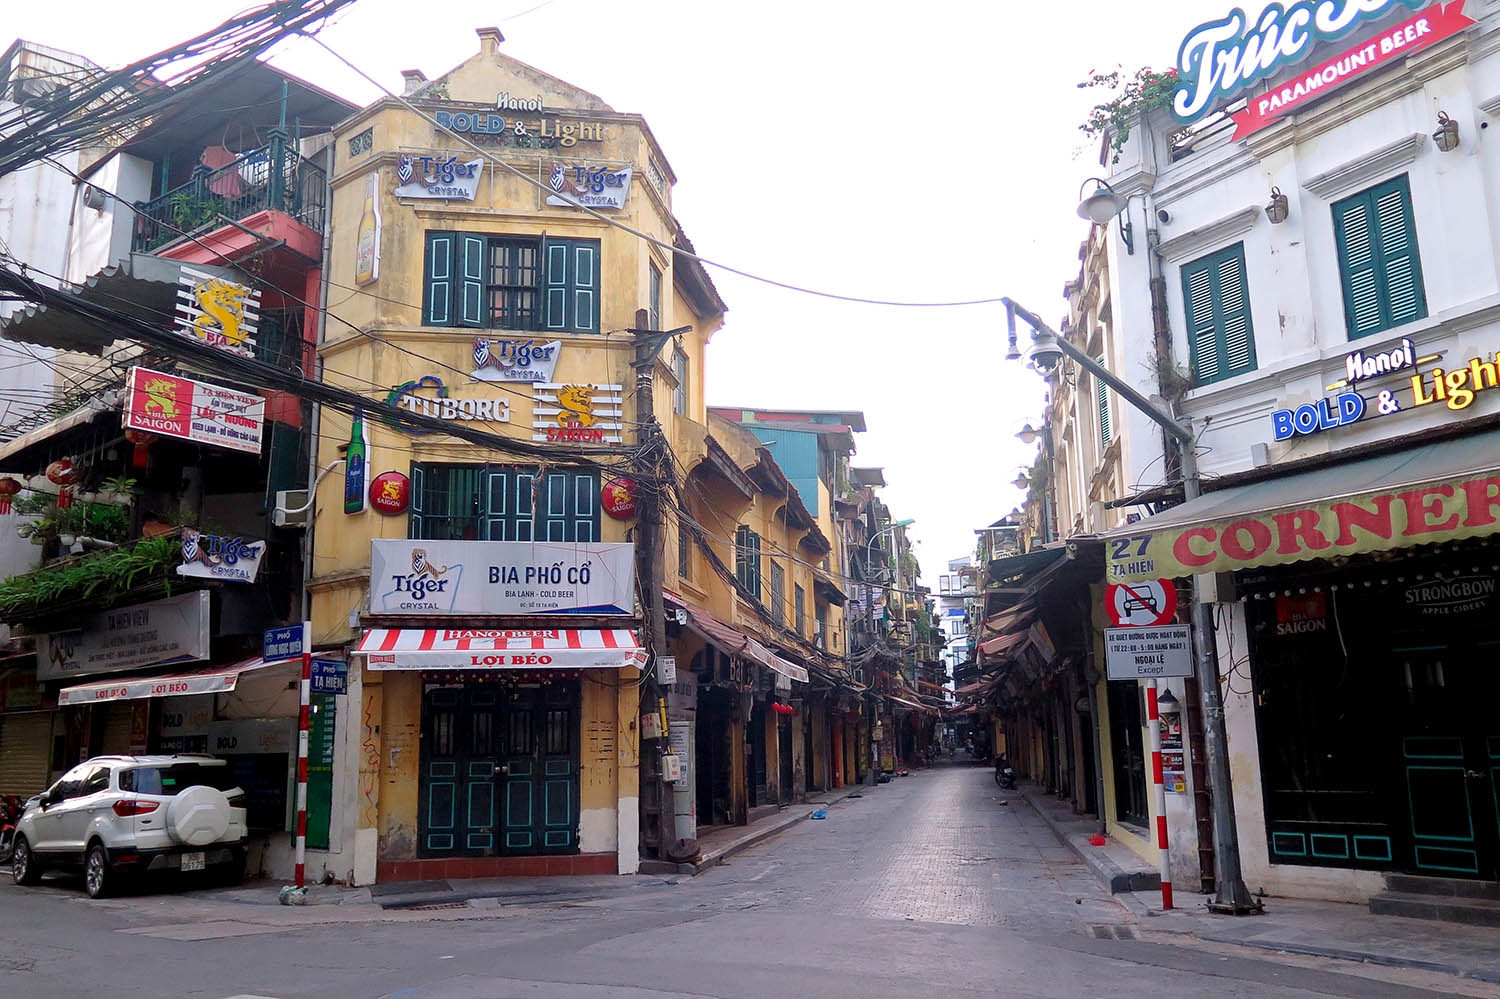 Social distancing empties out streets of Hanoi